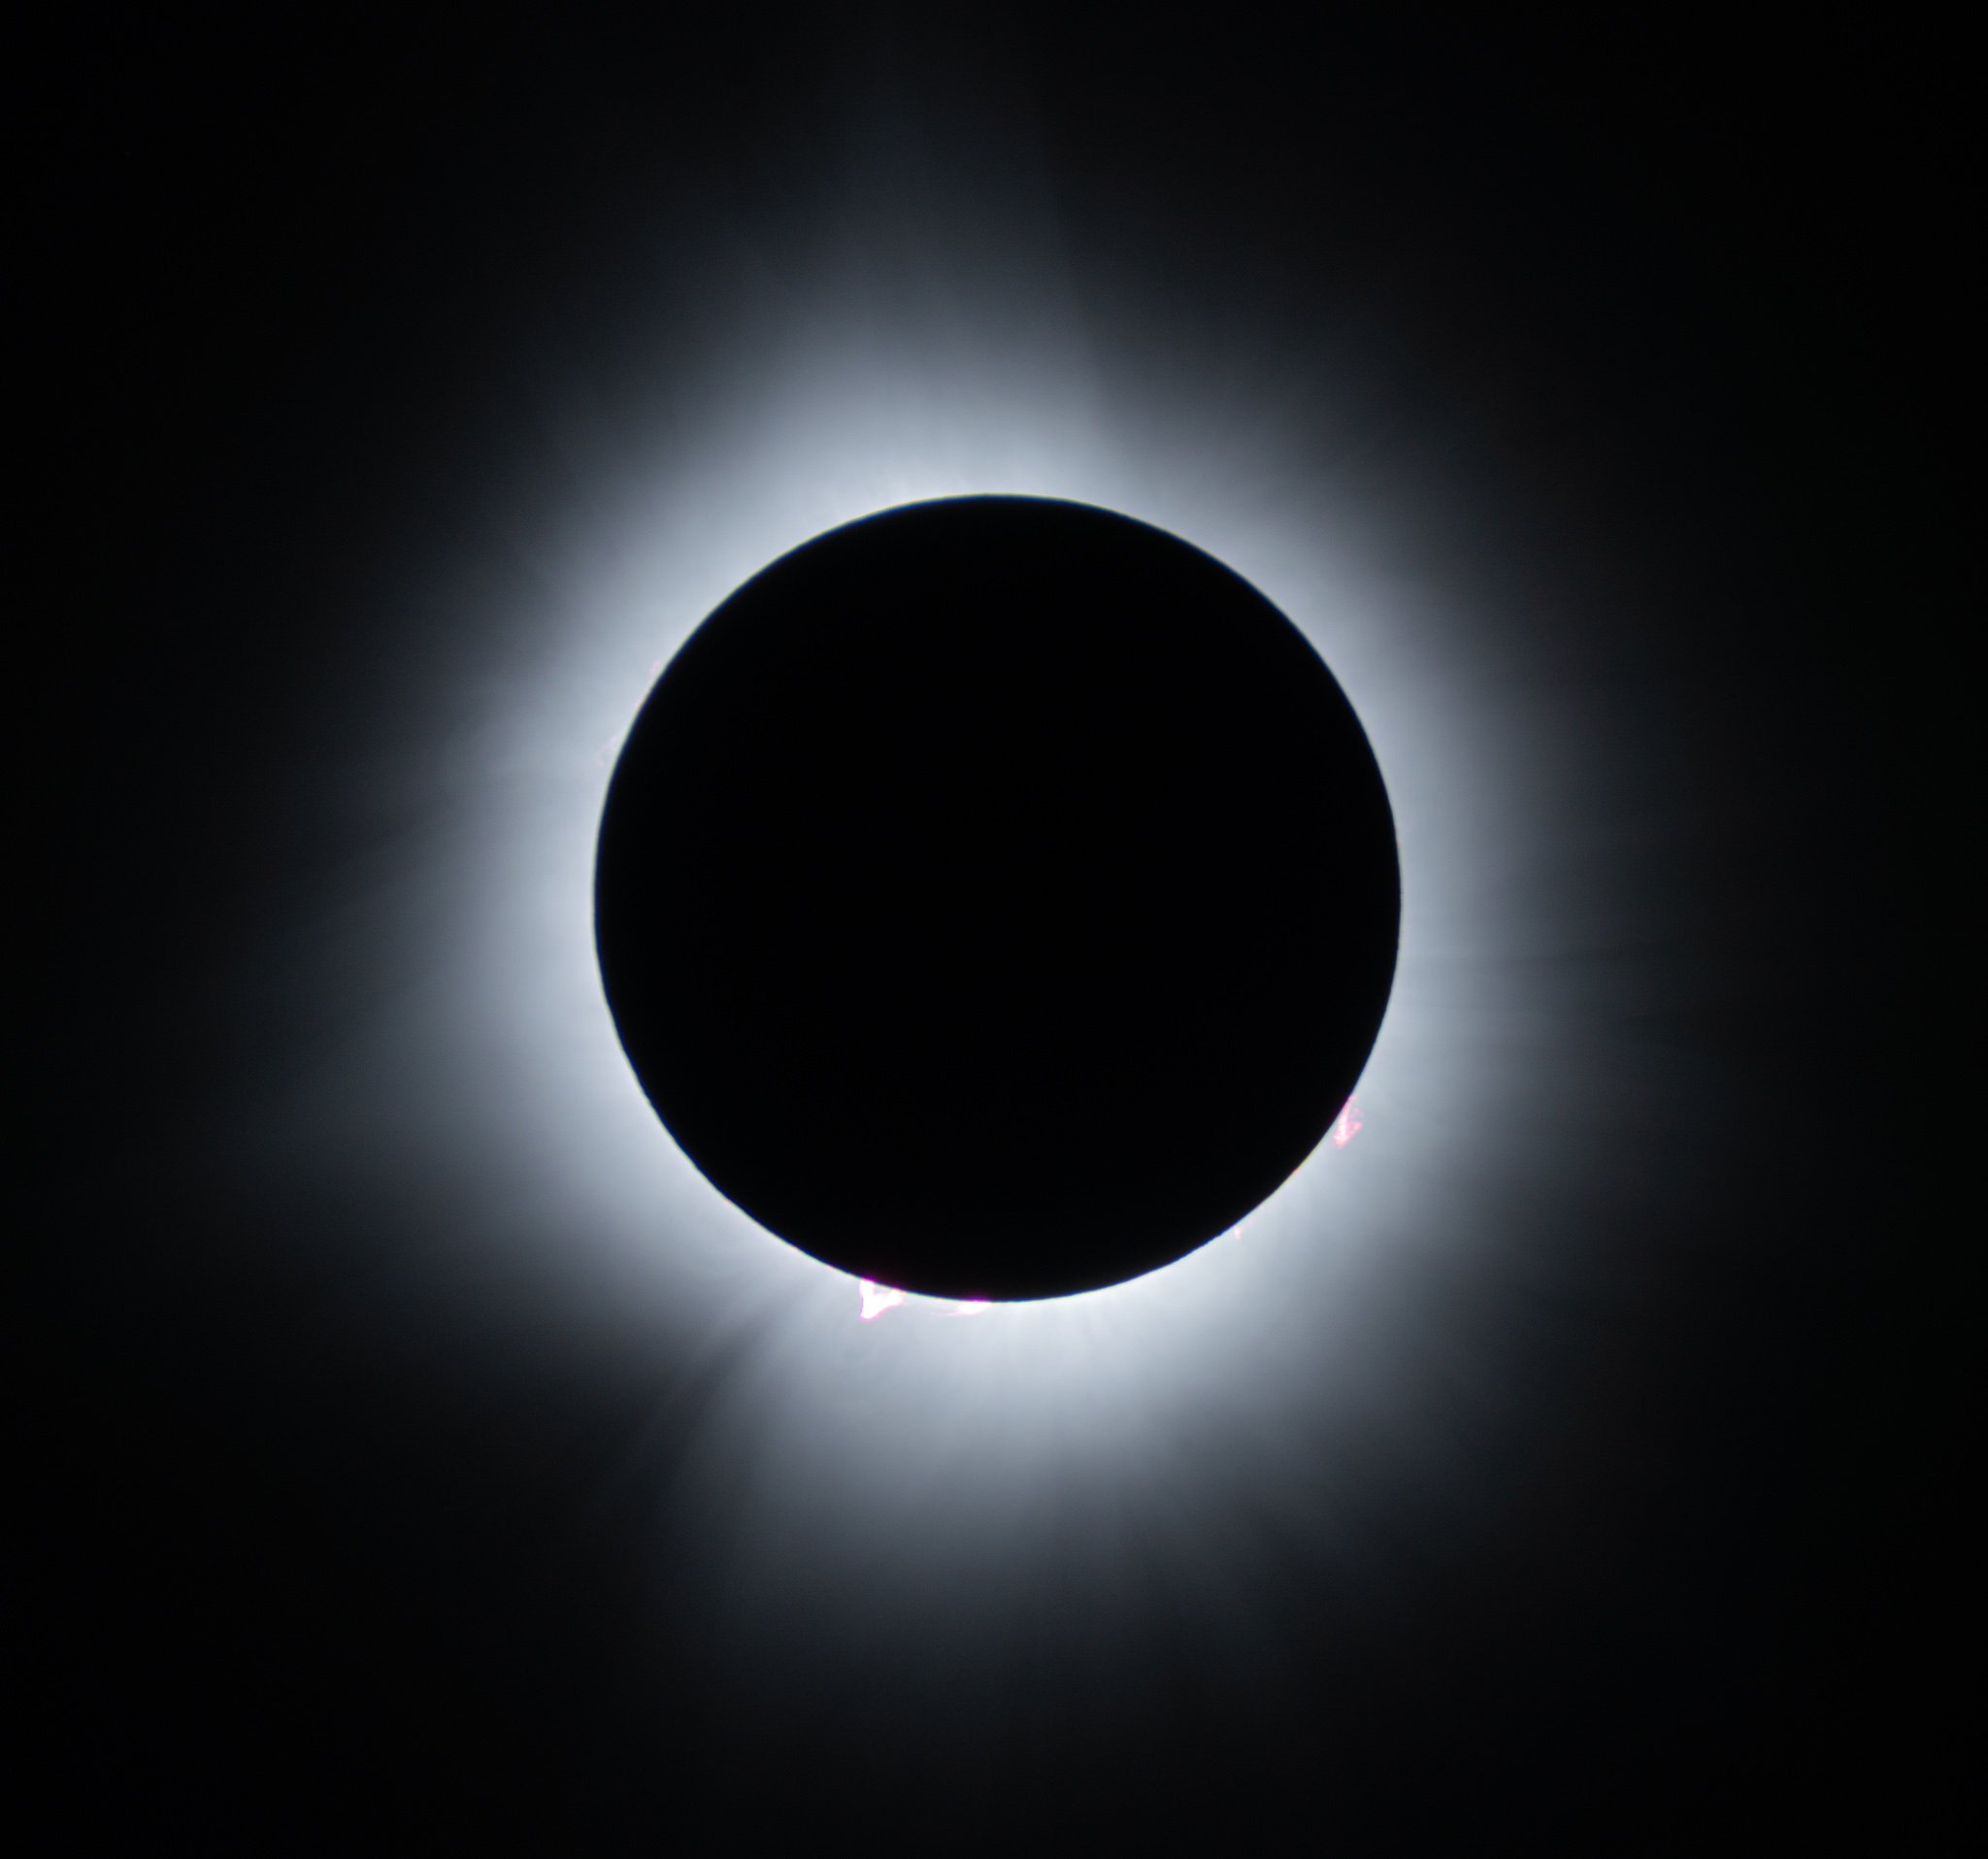 Obviously, everyone is going to be flooding social media with their images of the eclipse.  I've got a bunch more to go through, but I wanted to get this (quickly edited) image up while it's still relevant.  I have to say, totality was quite an exper